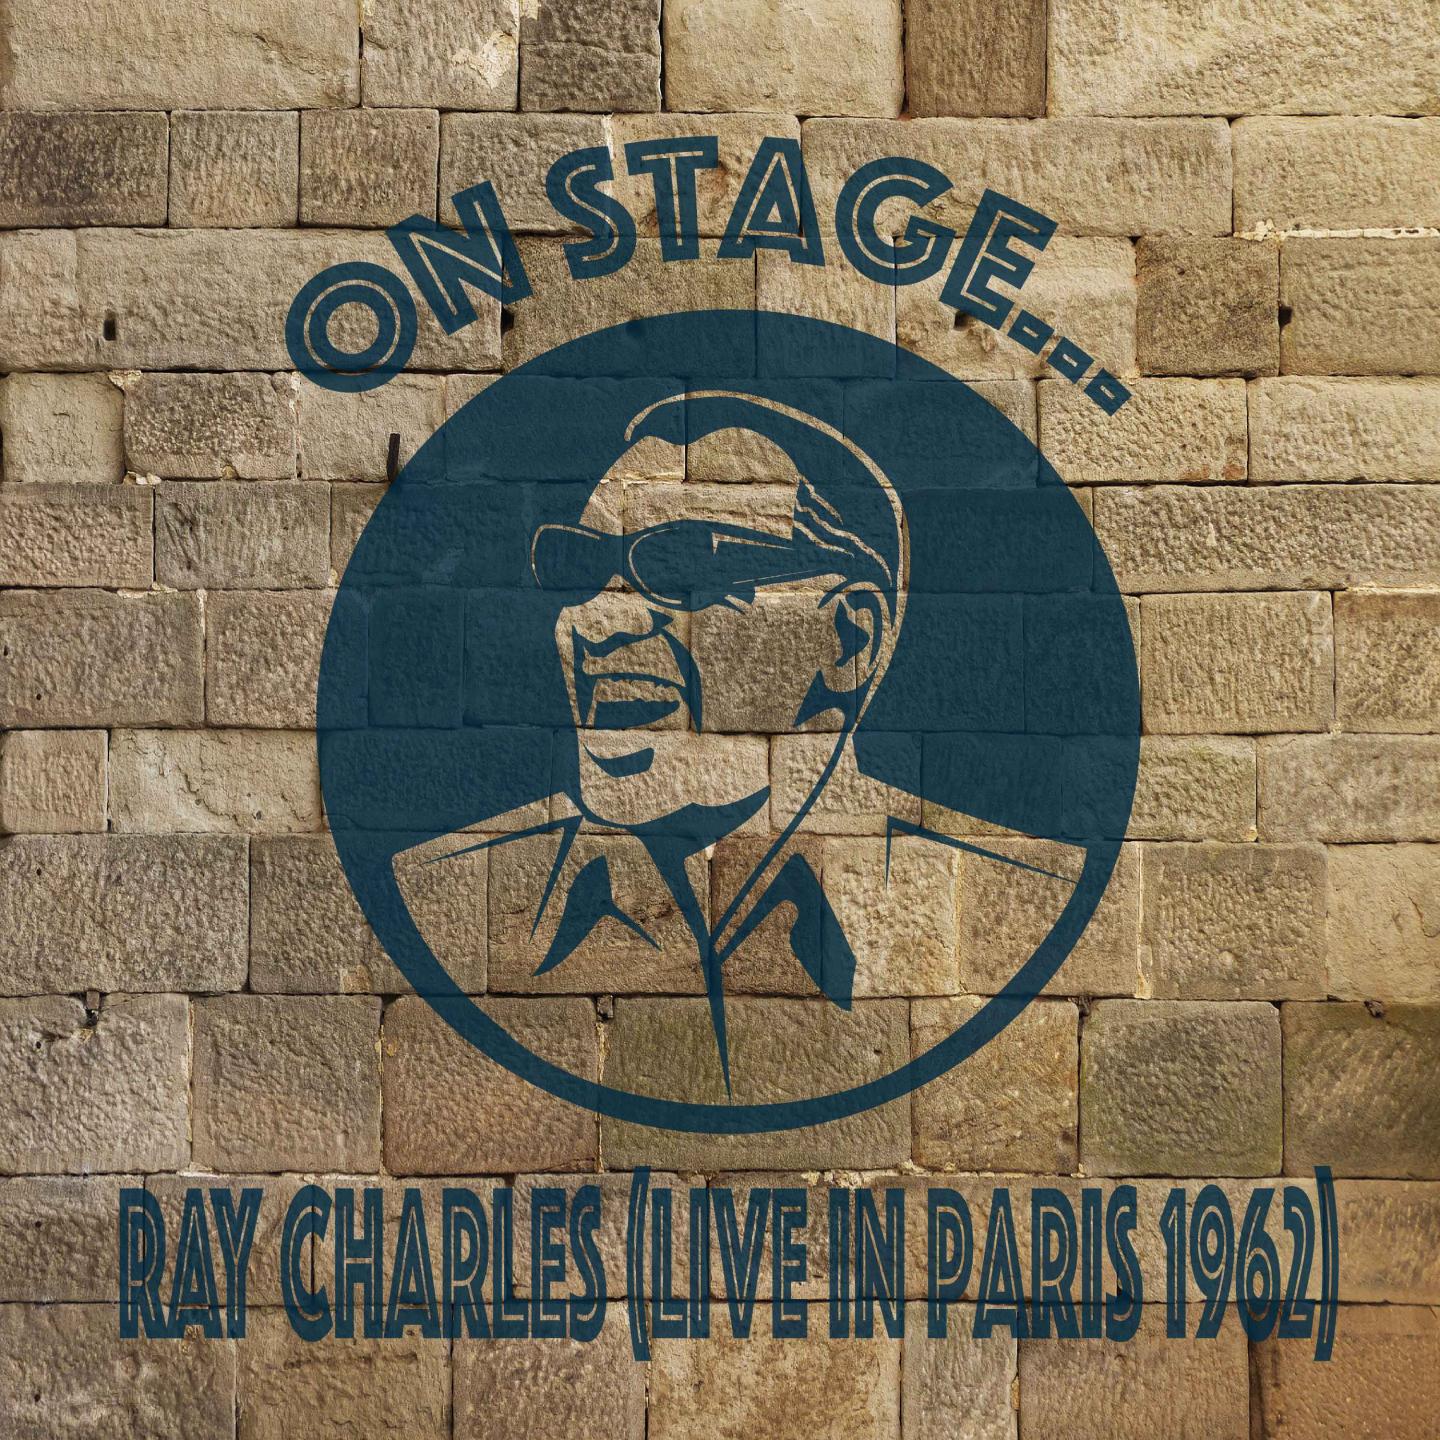 On Stage - Ray Charles (Live in Paris, 1962)